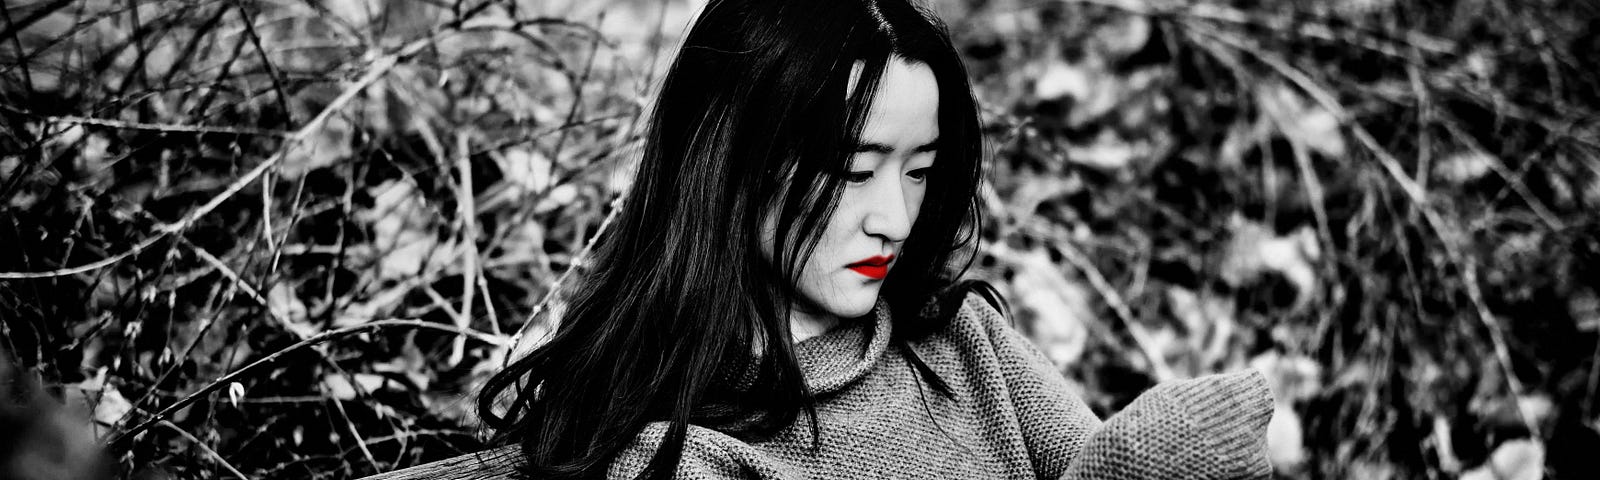 A black and white image of a sad Asian woman on a park bench. Her lips are red.